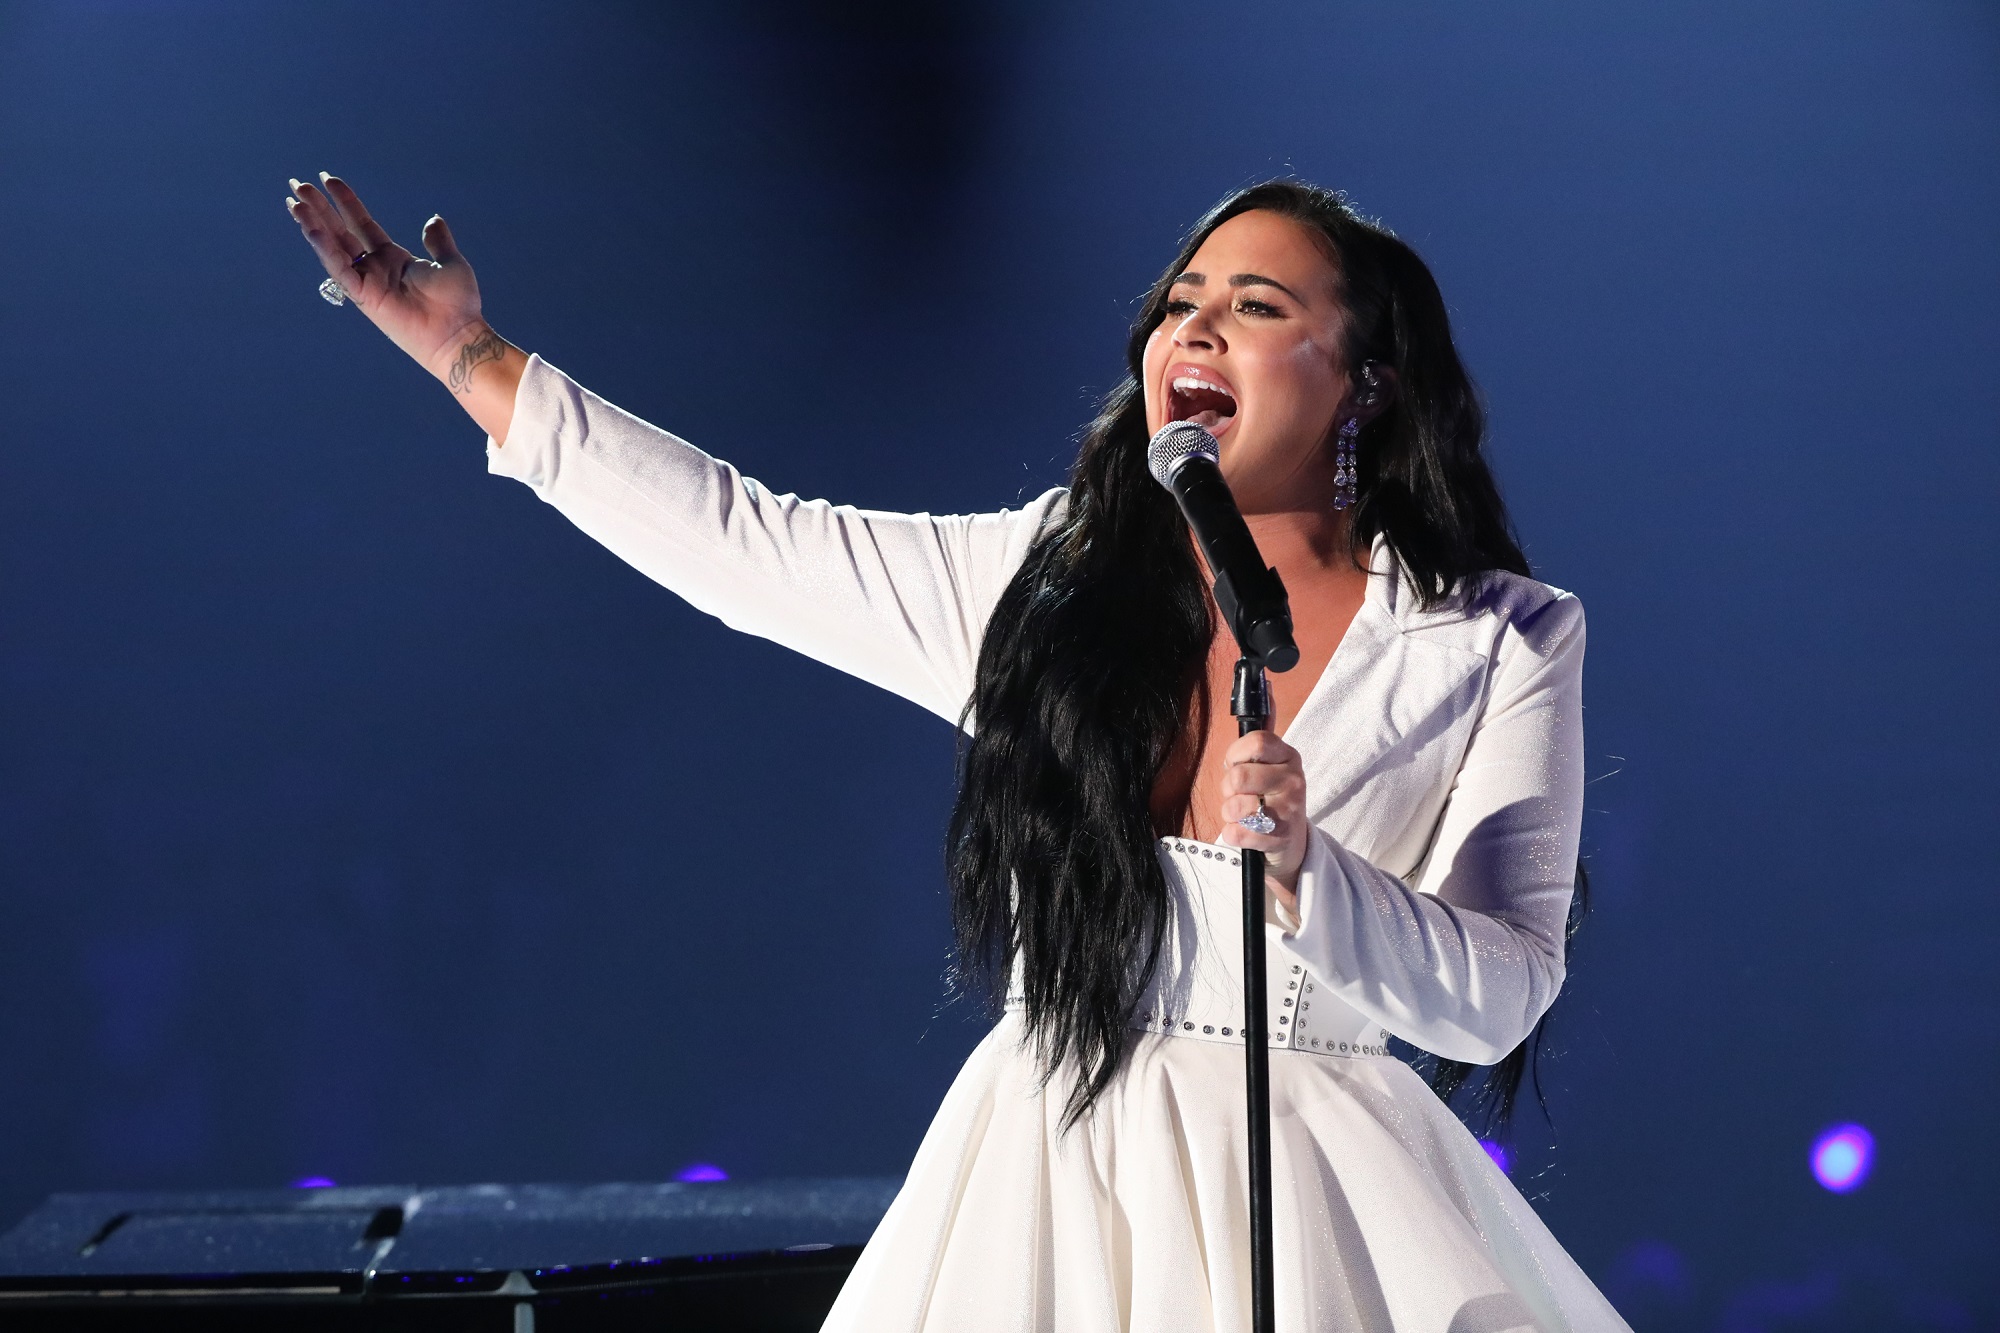 Demi Lovato performs at the 62nd Annual Grammy Awards on January 26, 2020 